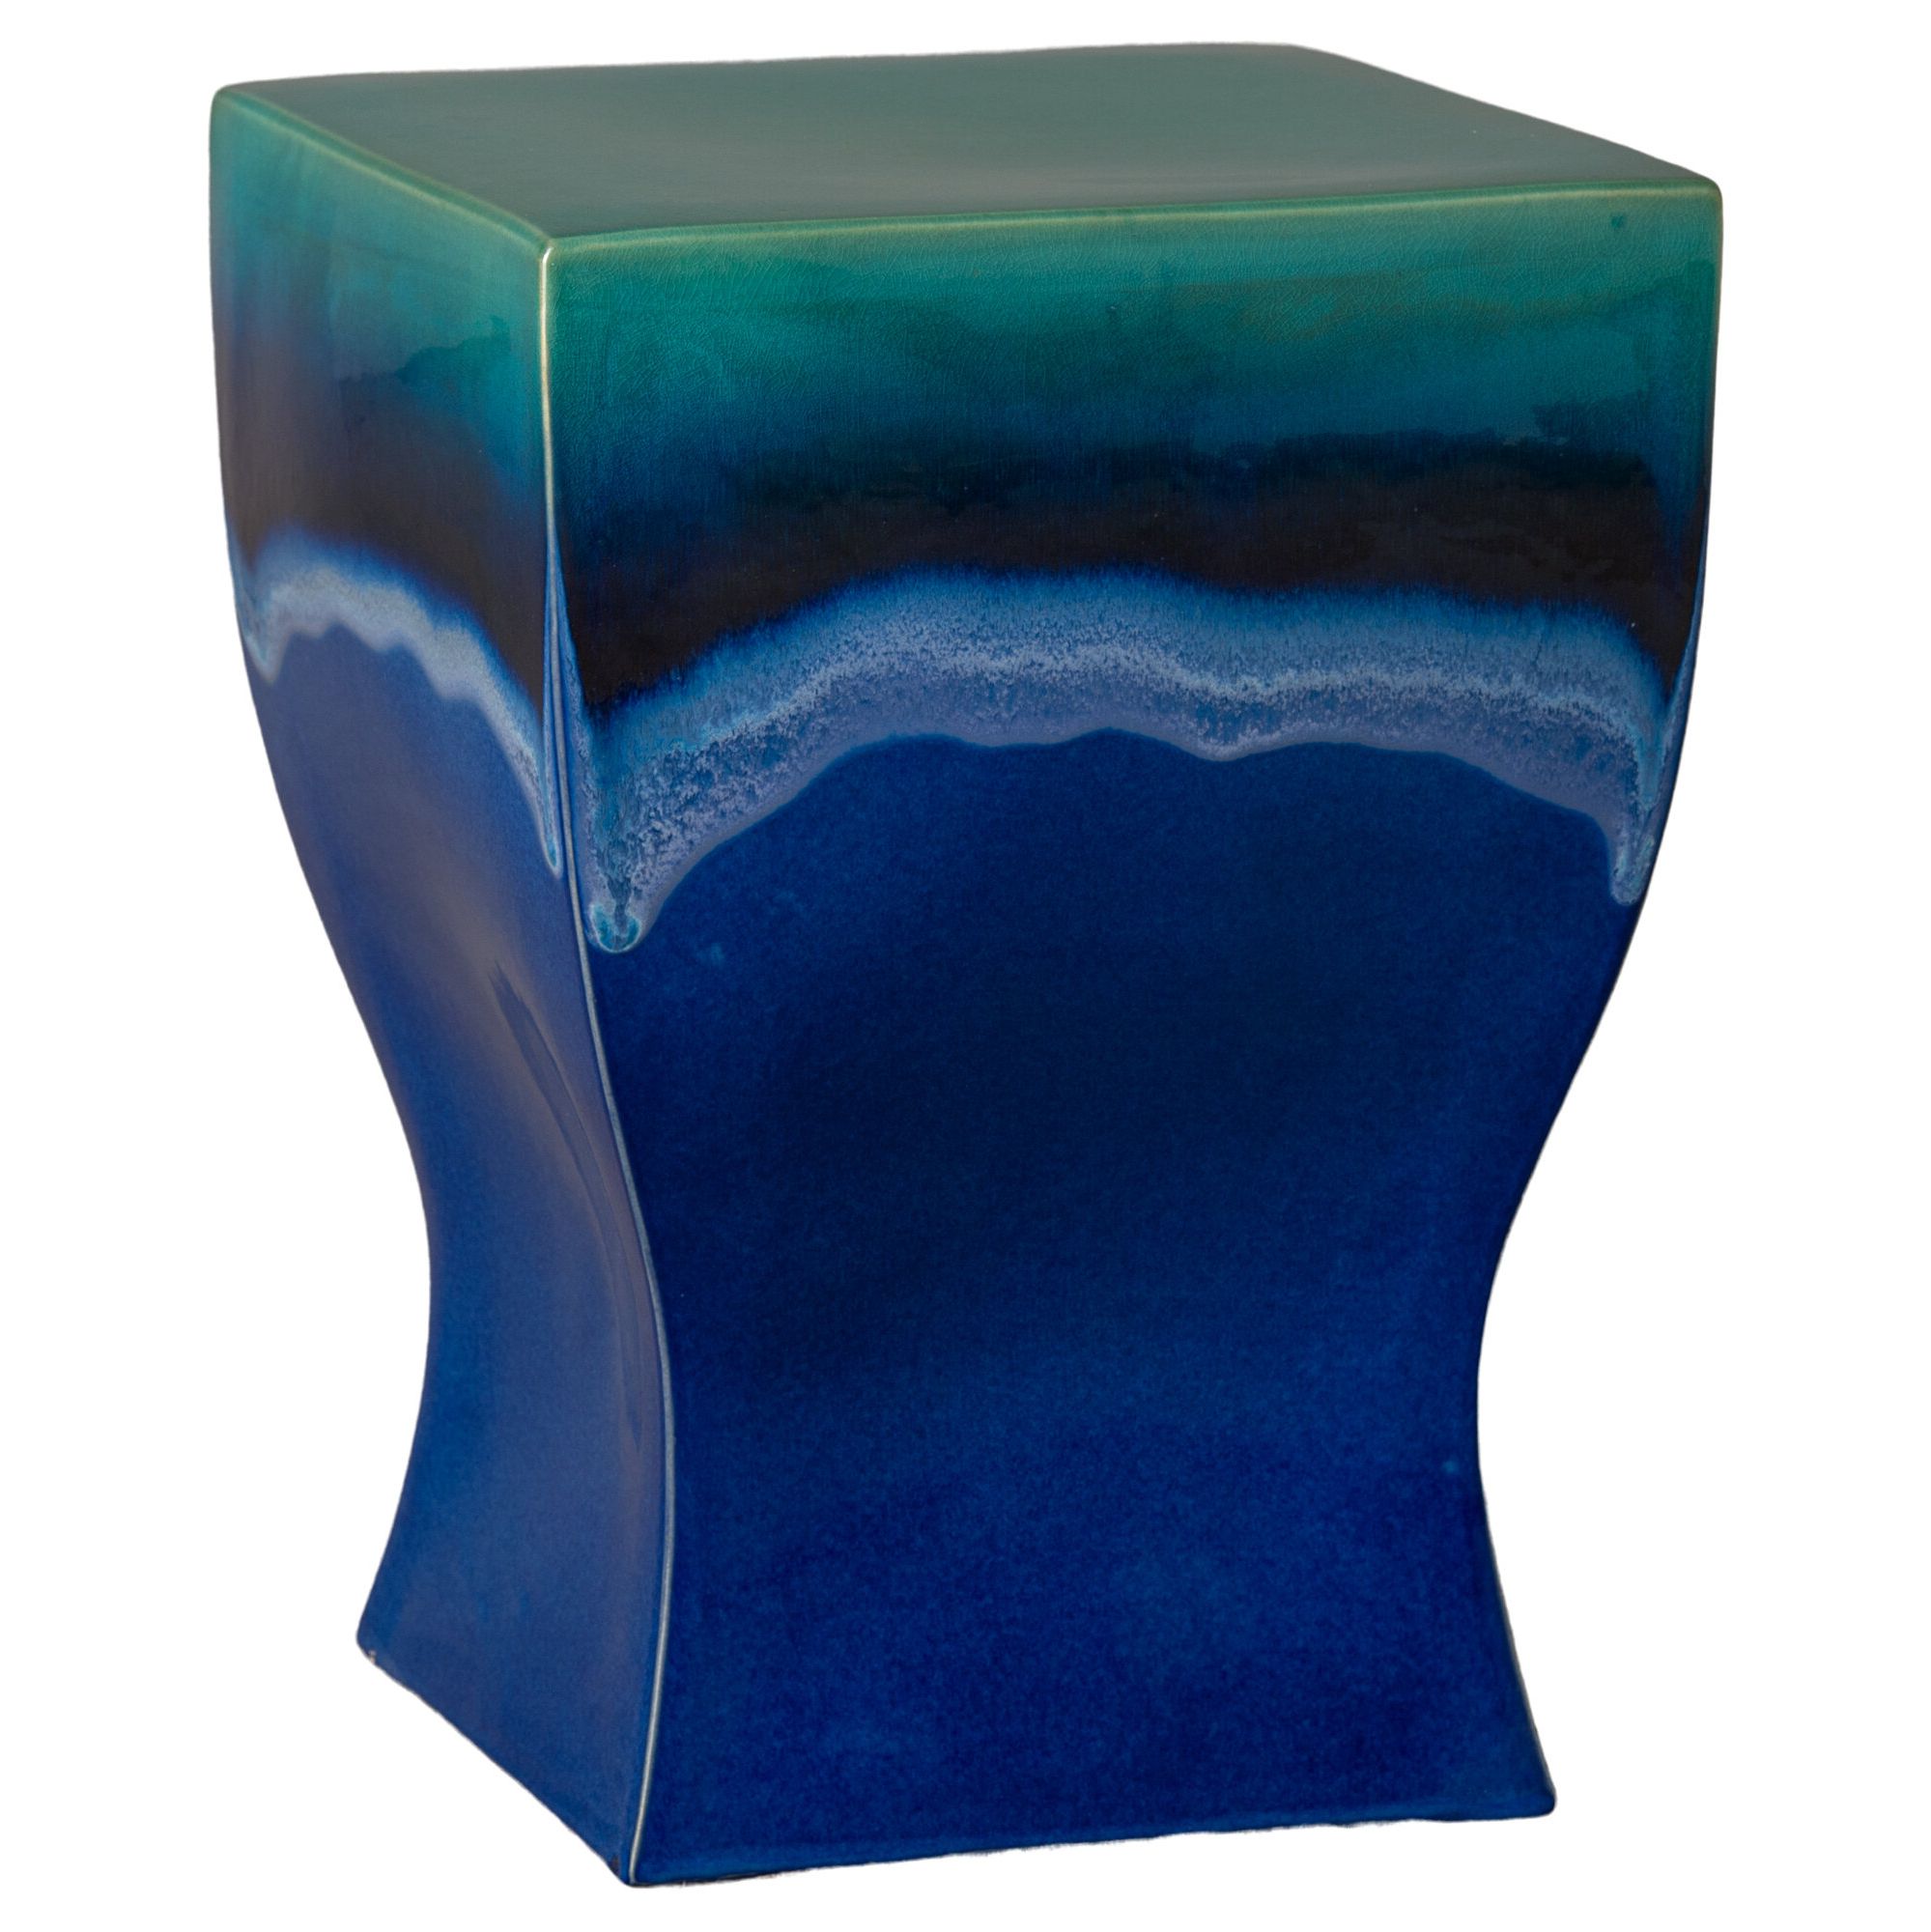 Most Popular Ormsby Ceramic Decorative Stool In Beckemeyer Ceramic Garden Stools (View 3 of 30)